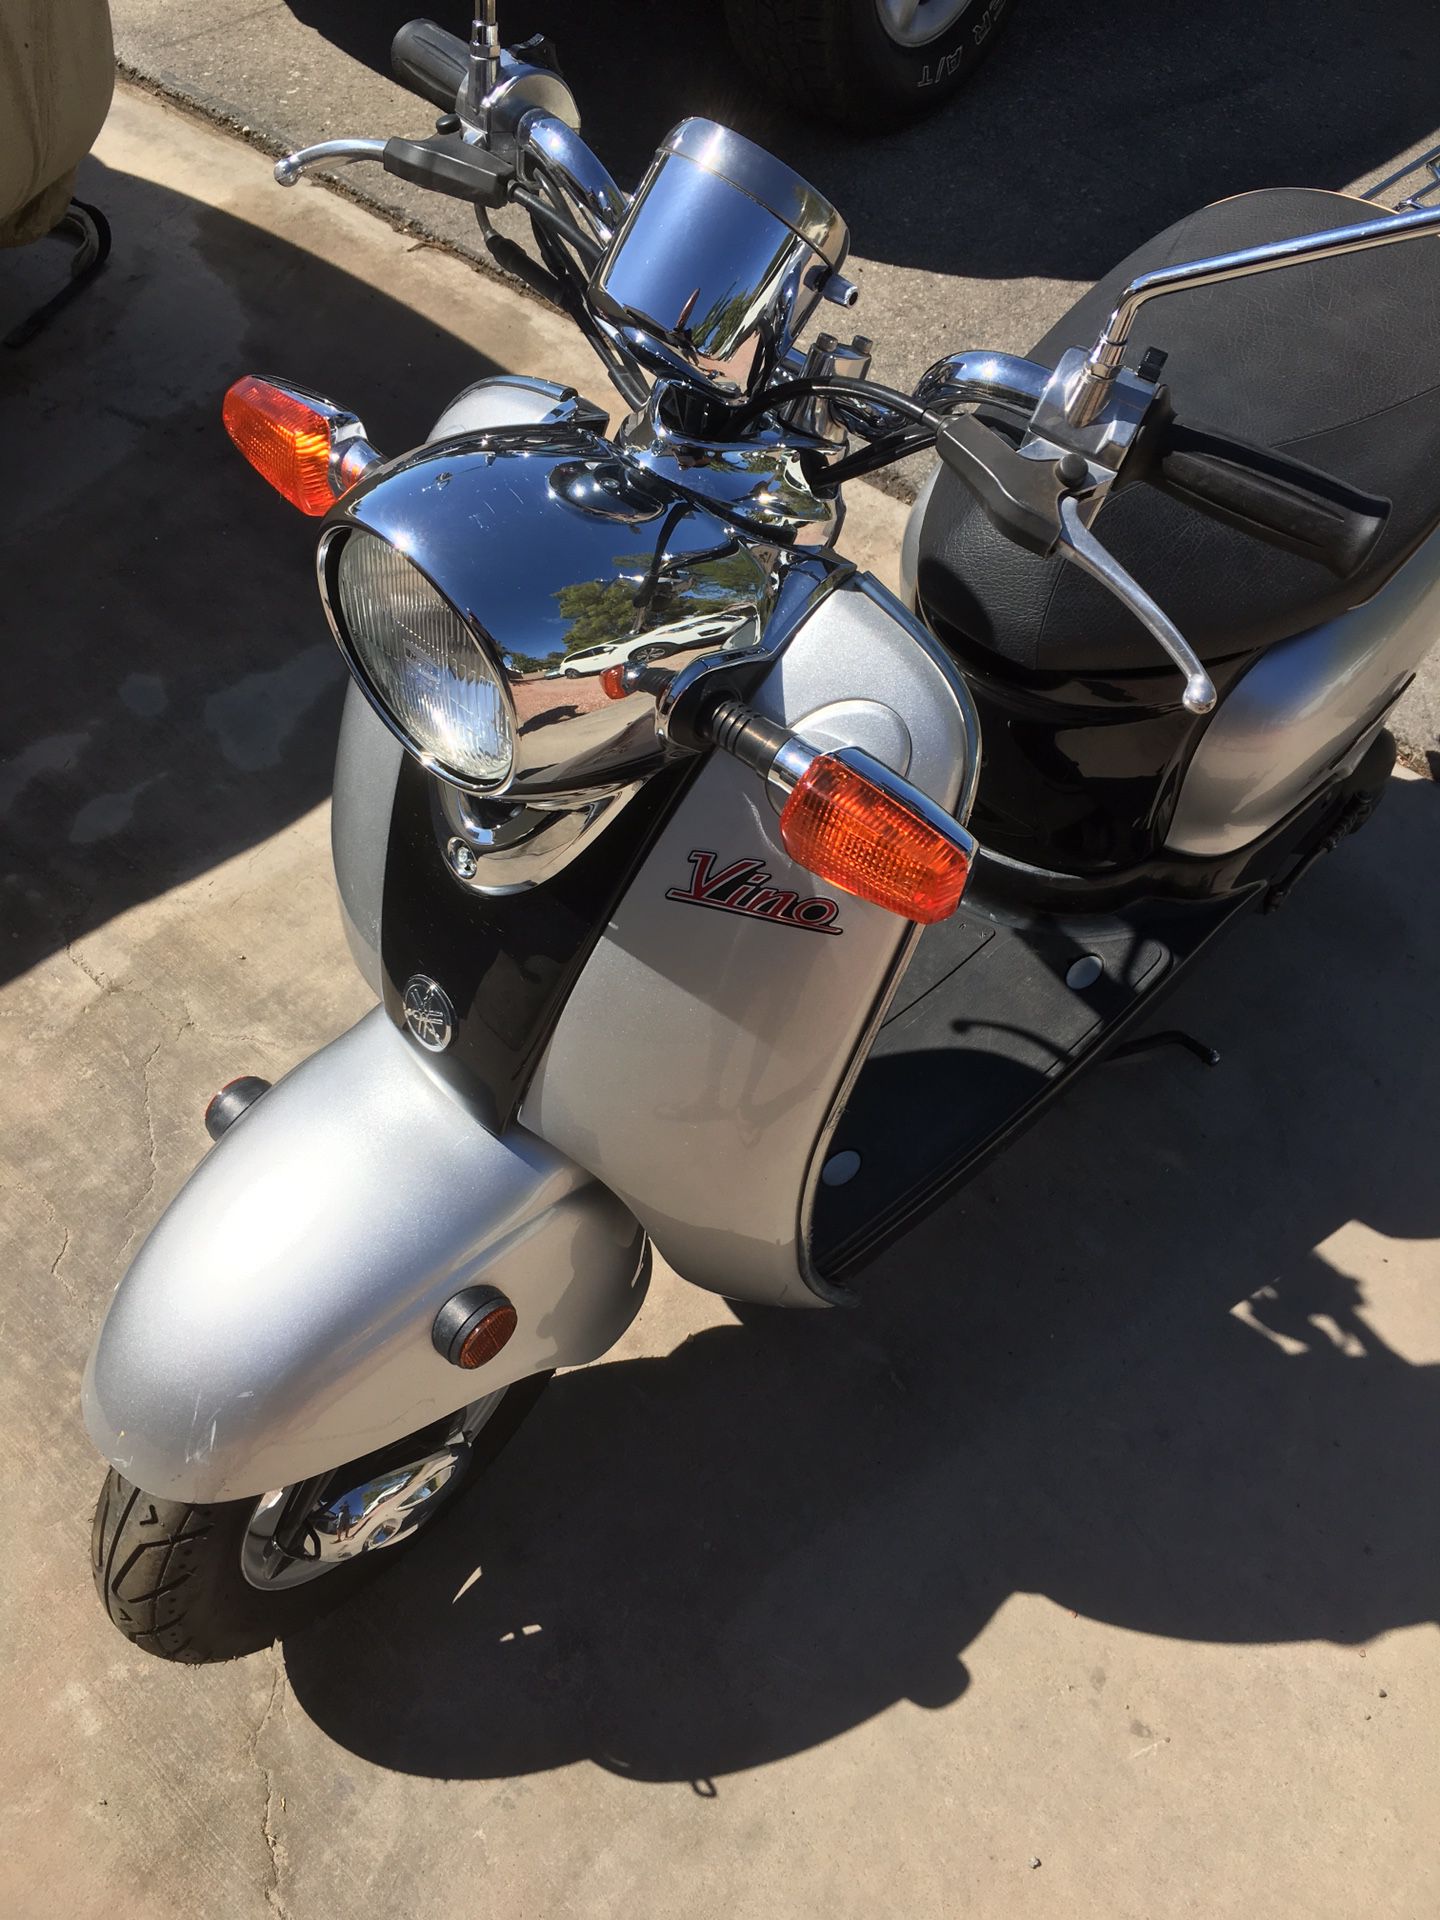 Yamaha Vino scooter/scooter/motorcycle/transportation/reliable vehicle